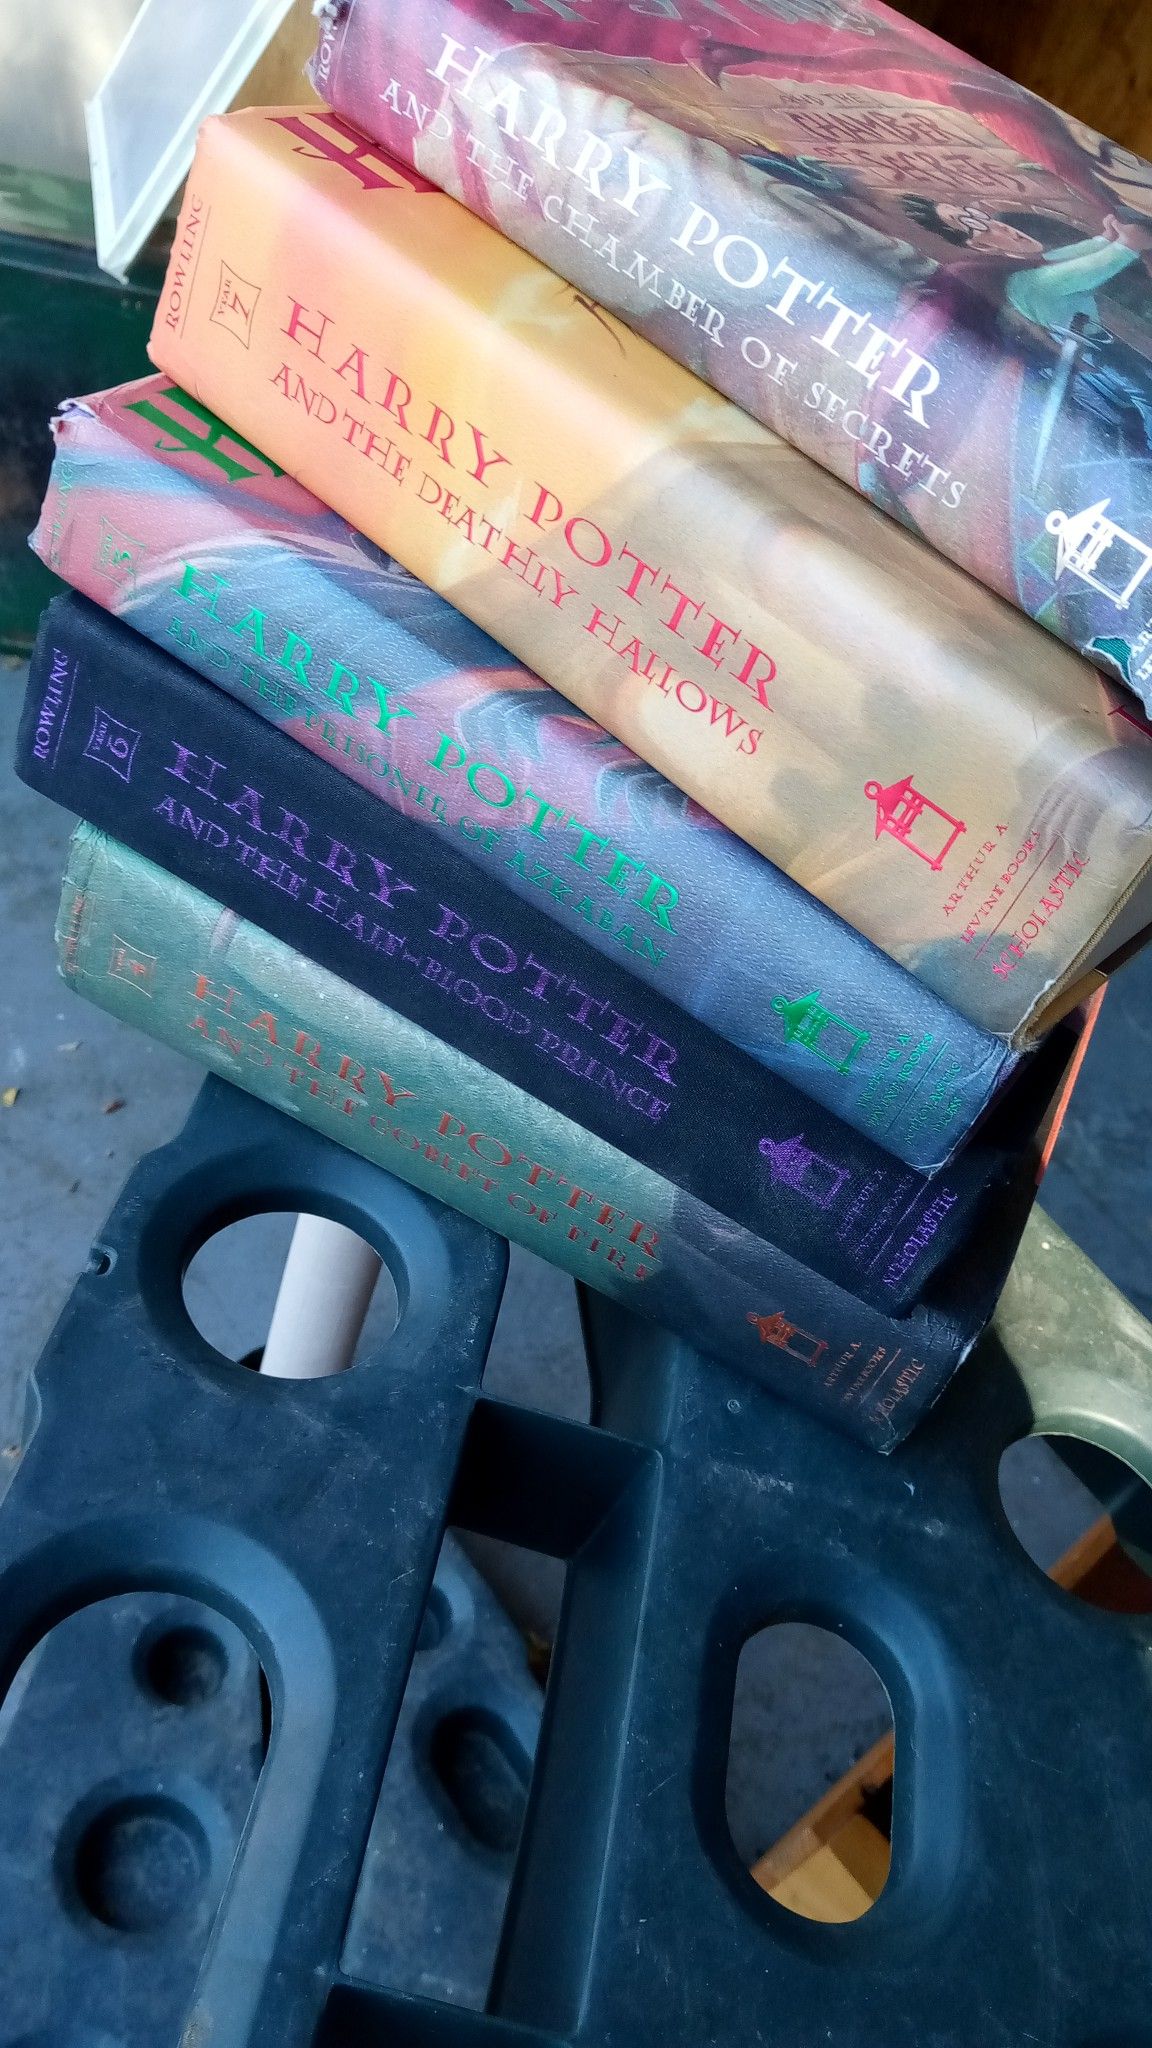 Five Harry Potter Books. All In Perfect Condition. All For $3